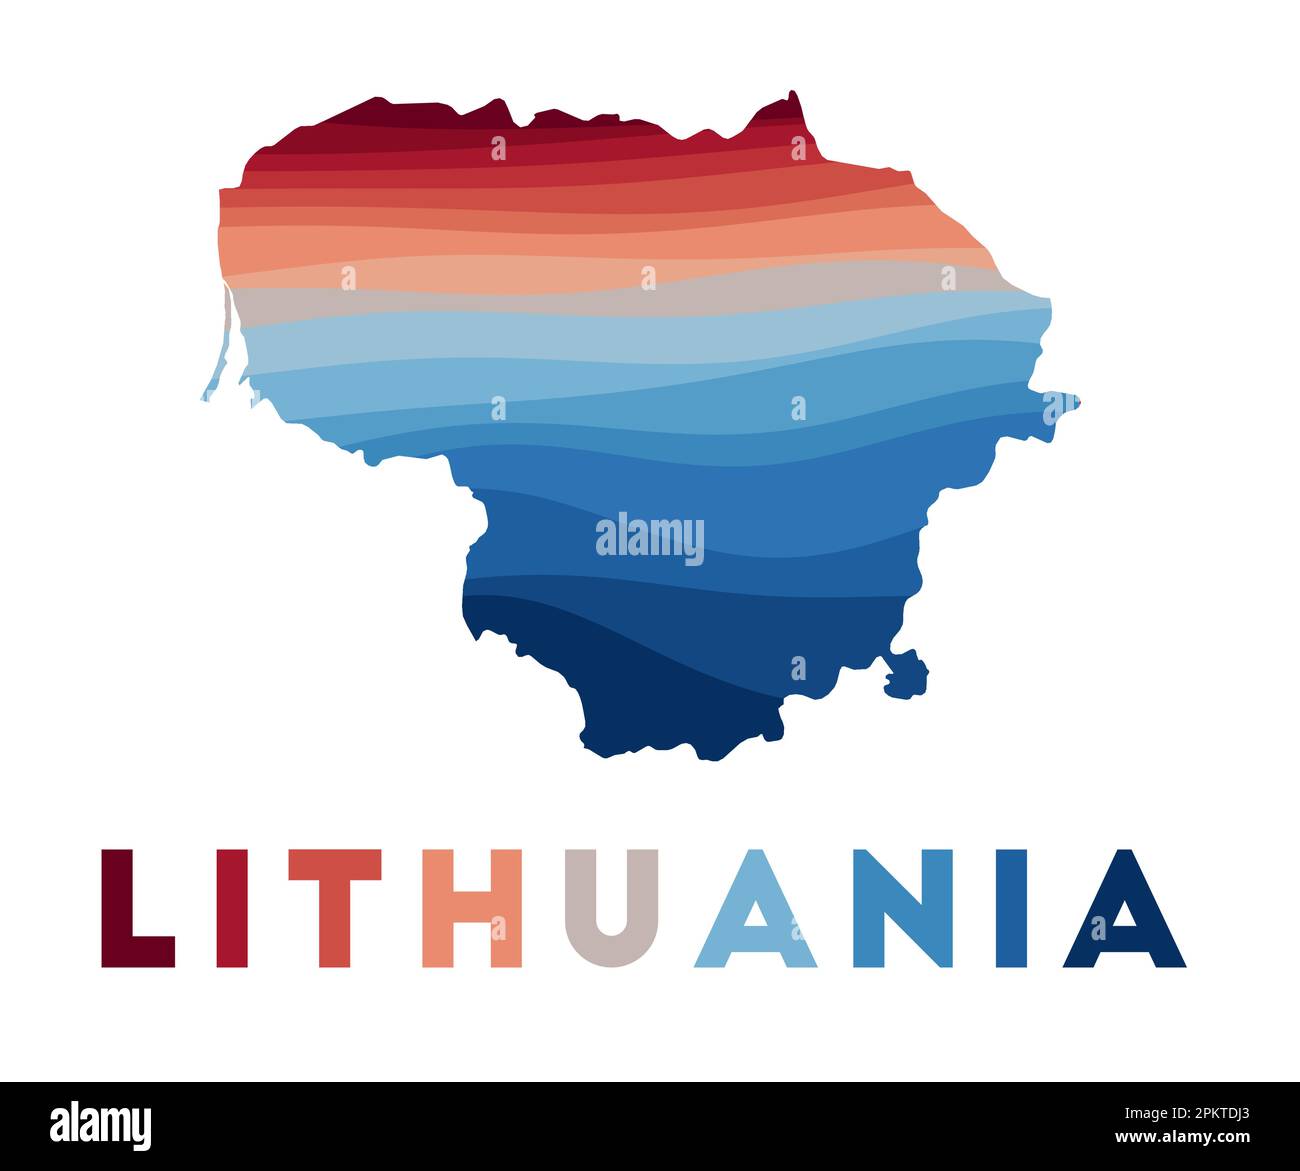 Lithuania map. Map of the country with beautiful geometric waves in red blue colors. Vivid Lithuania shape. Vector illustration. Stock Vector